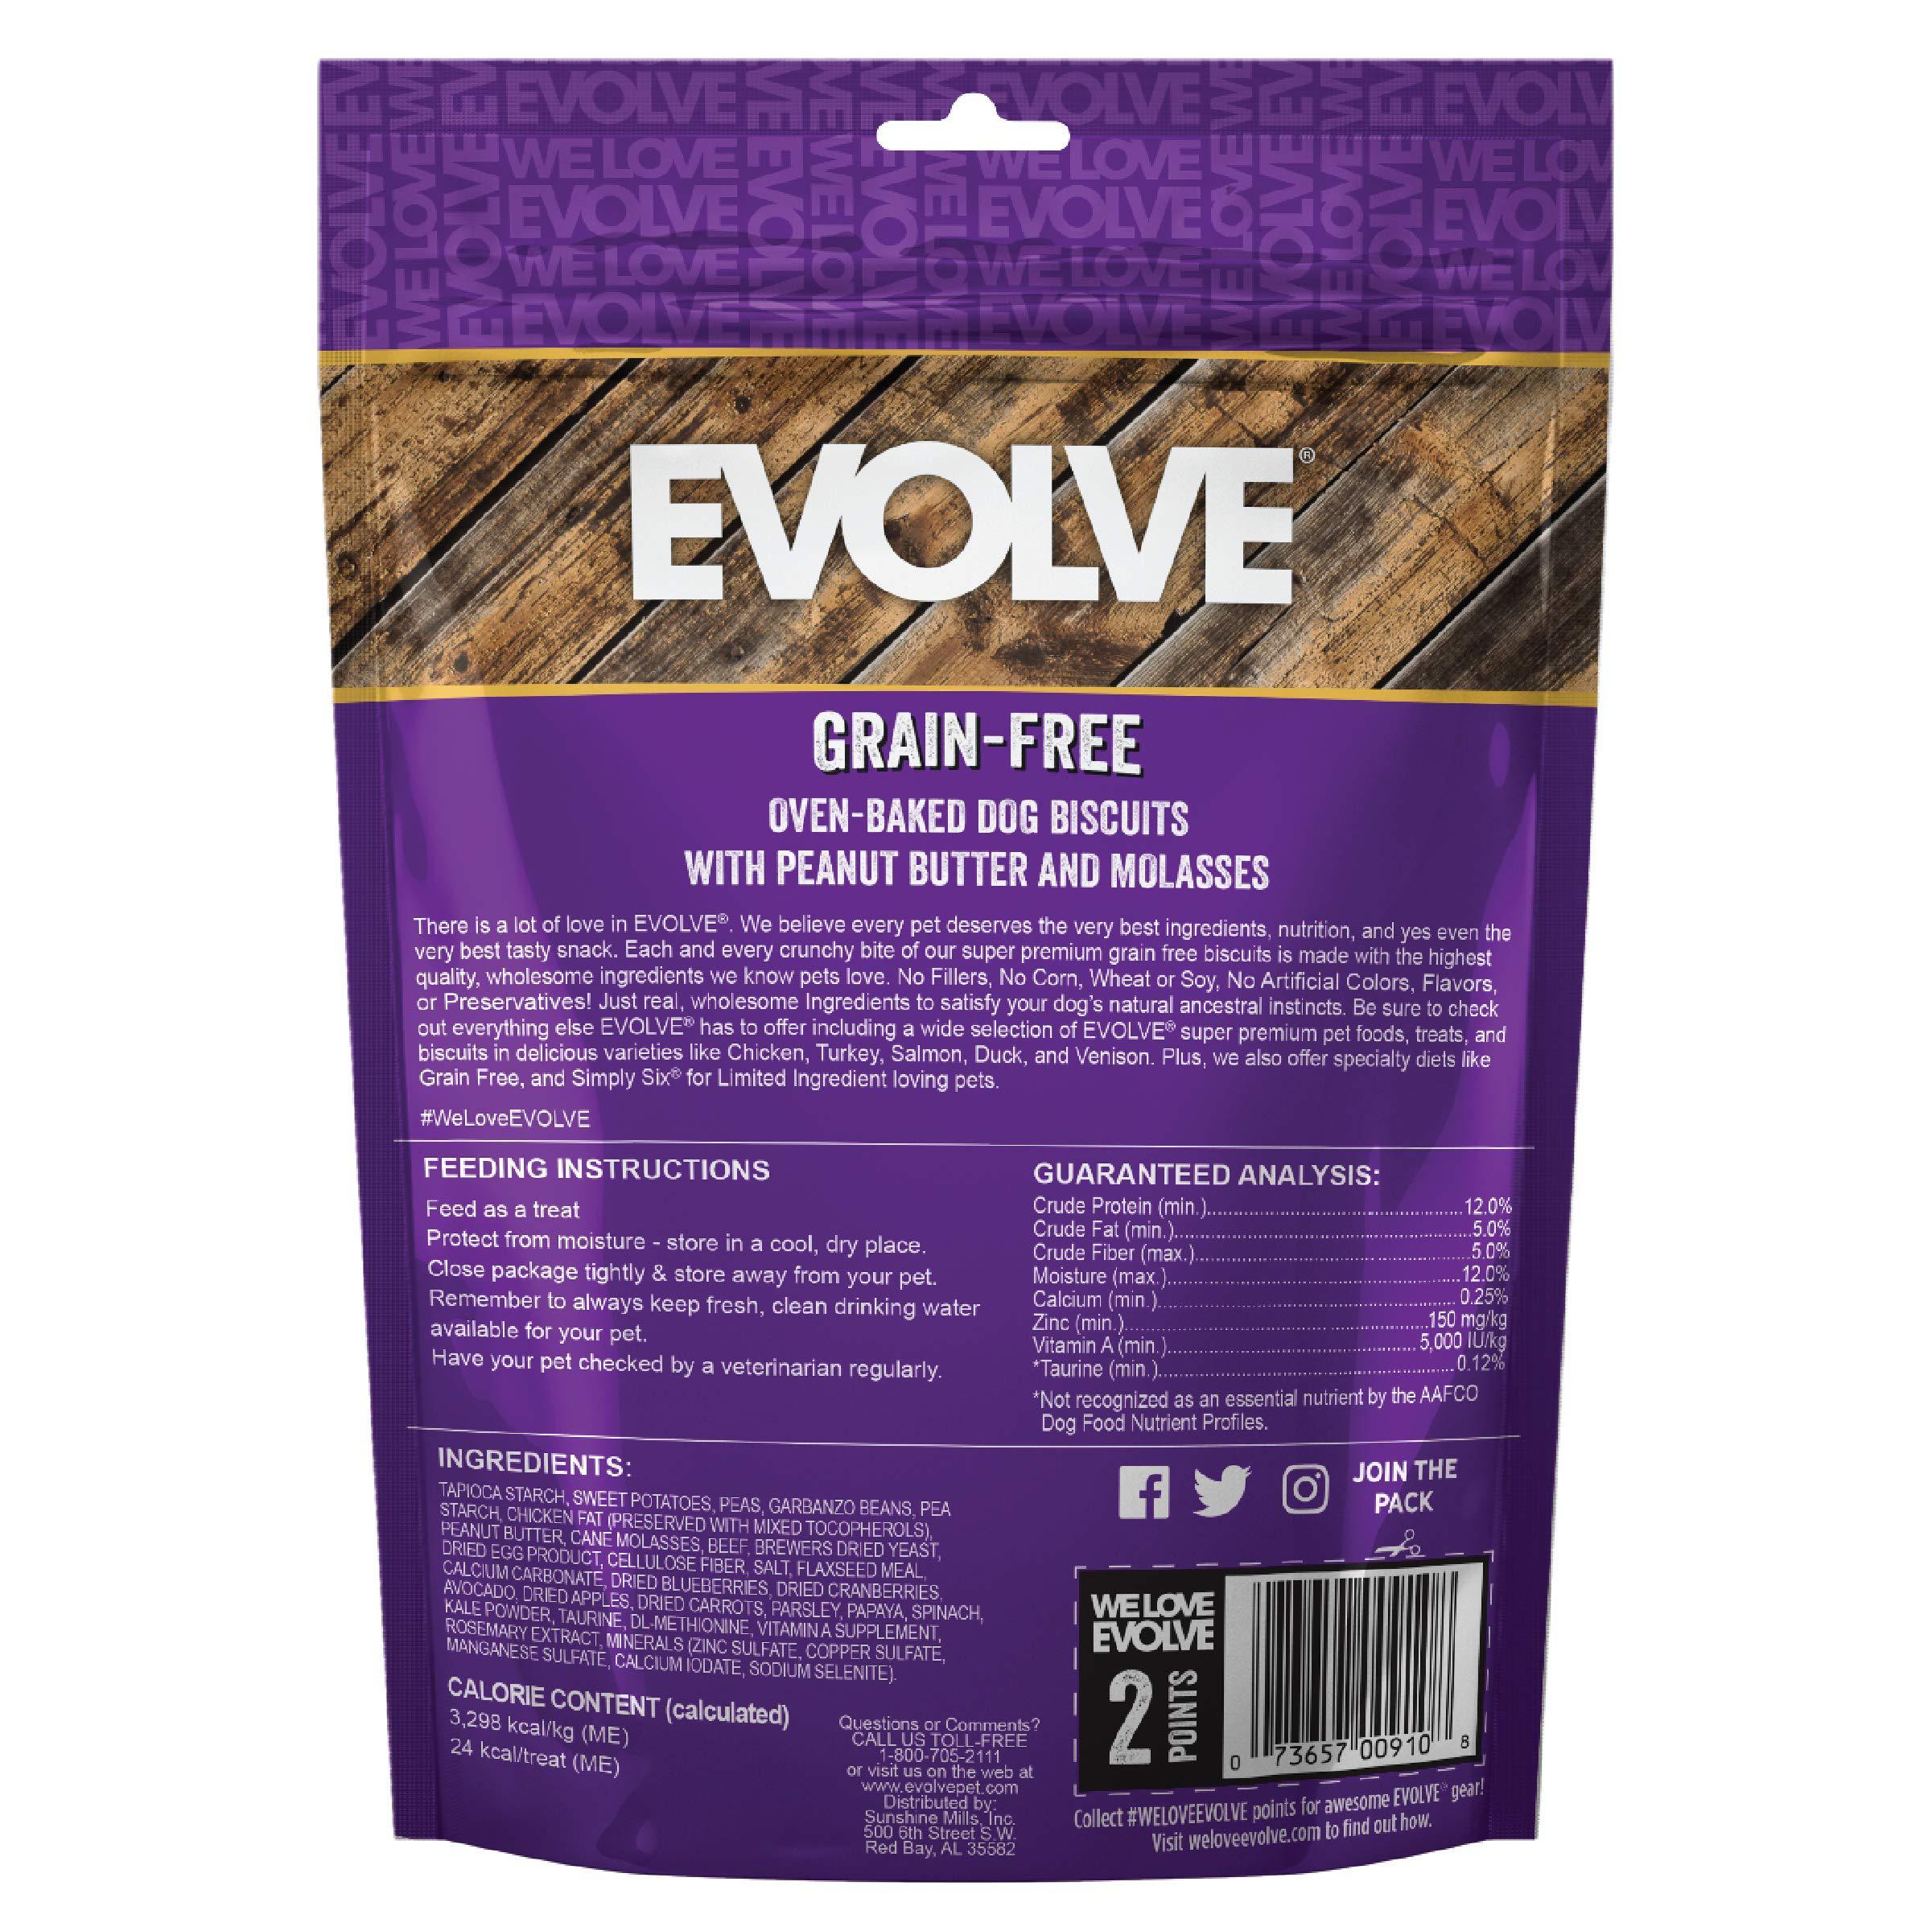 evolve grain free dog biscuits with real peanut butter and molasses